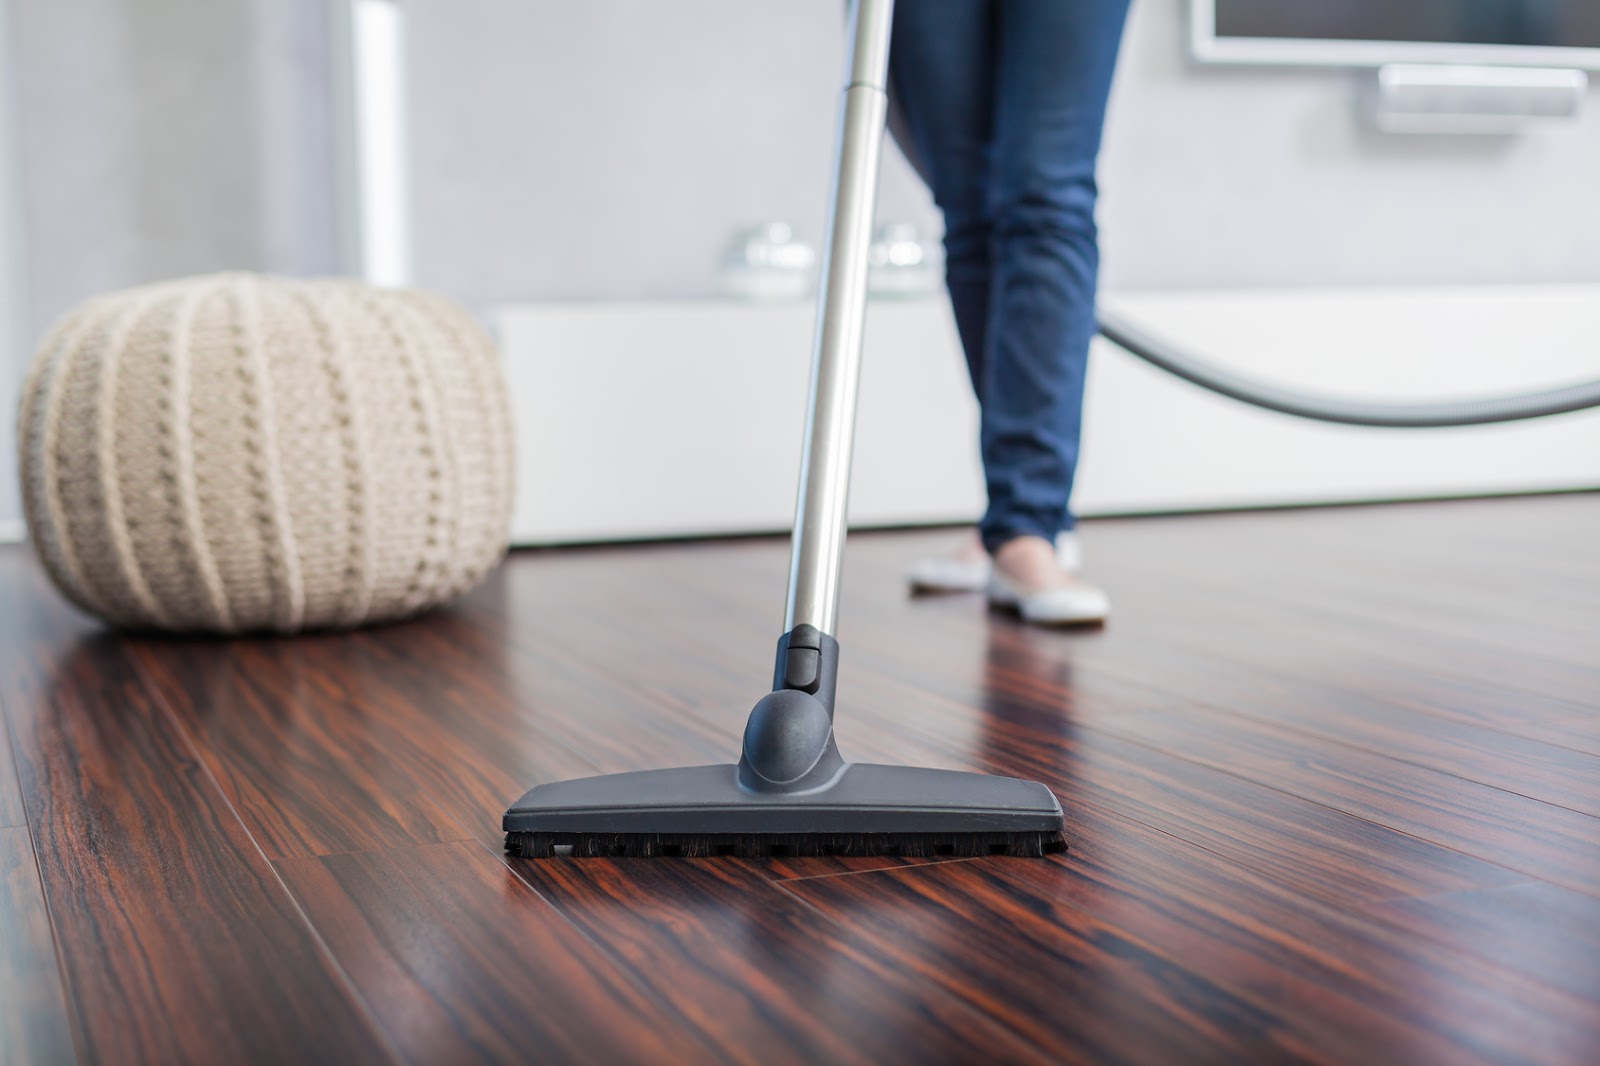 home cleaning Vacuum wooden floor Top 4 Reasons You Might Need a Professional Home Cleaning Service - 1